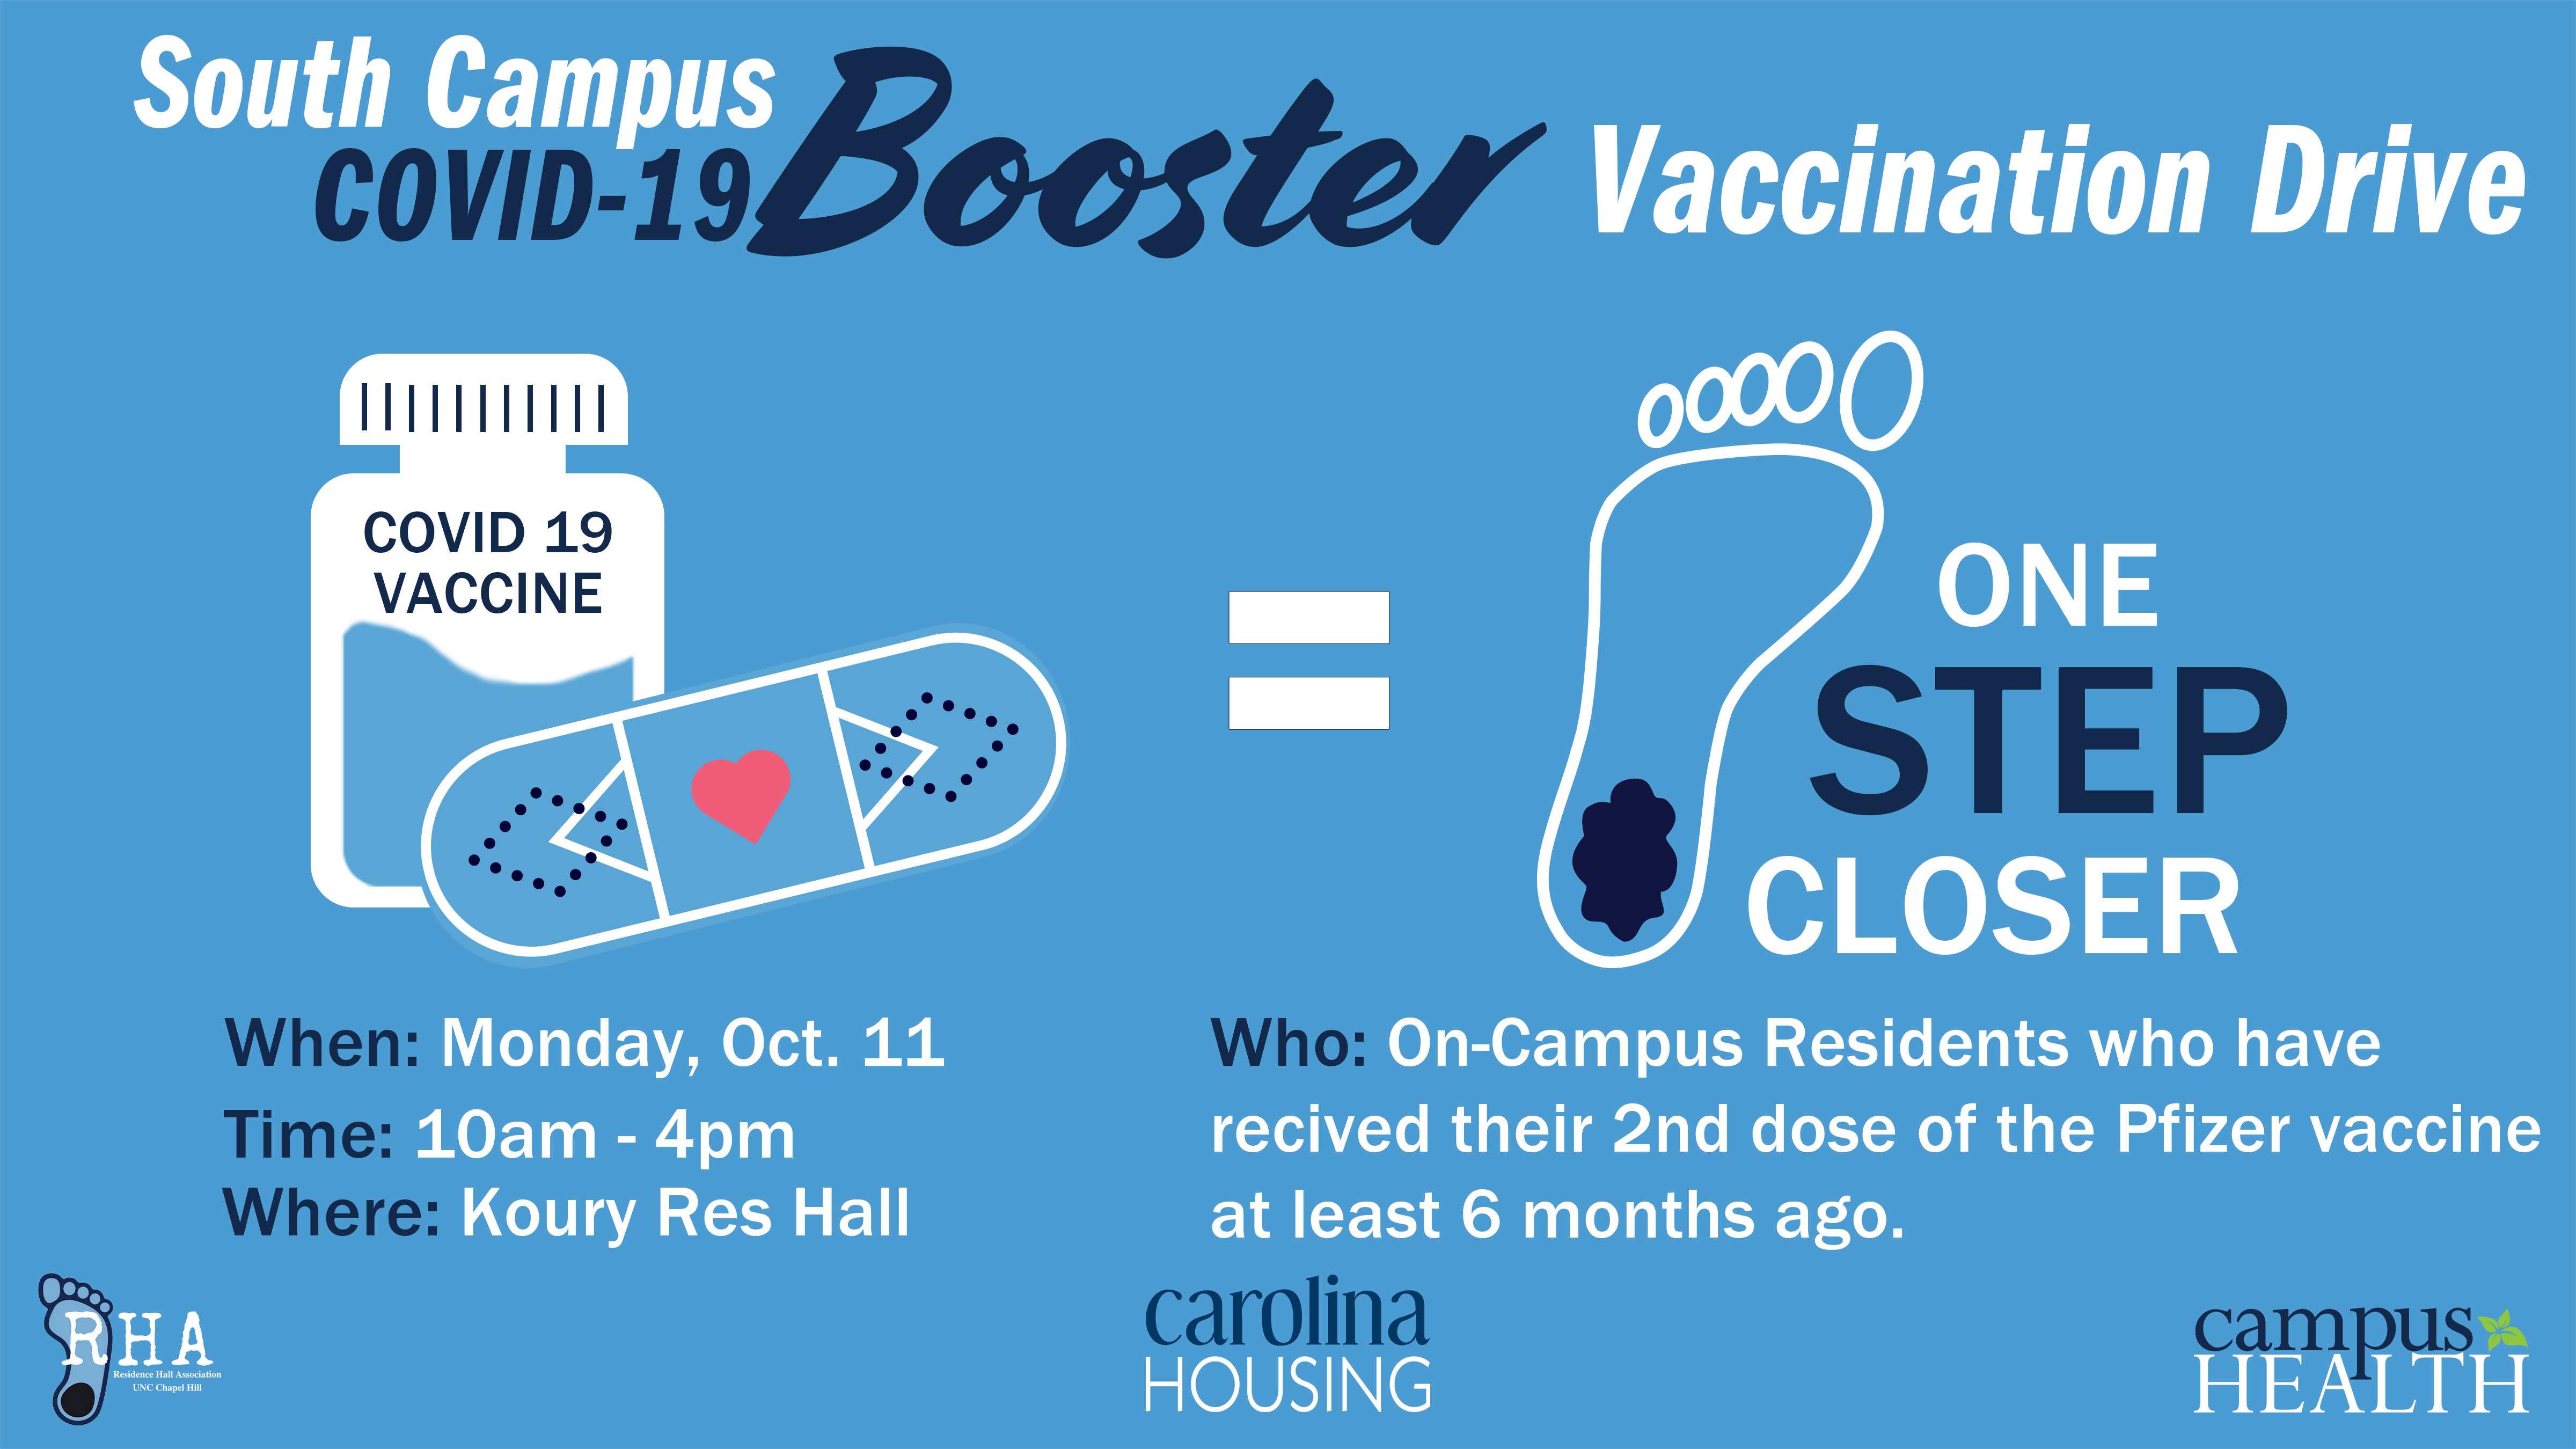 South Campus COVID-19 Booster Vaccination Drive Monday Oct 11 10 am - 4 pm Koury Res Hall for On-Campus Residents who have received their 2nd dose of the Pfizer vaccine at least 6 months ago